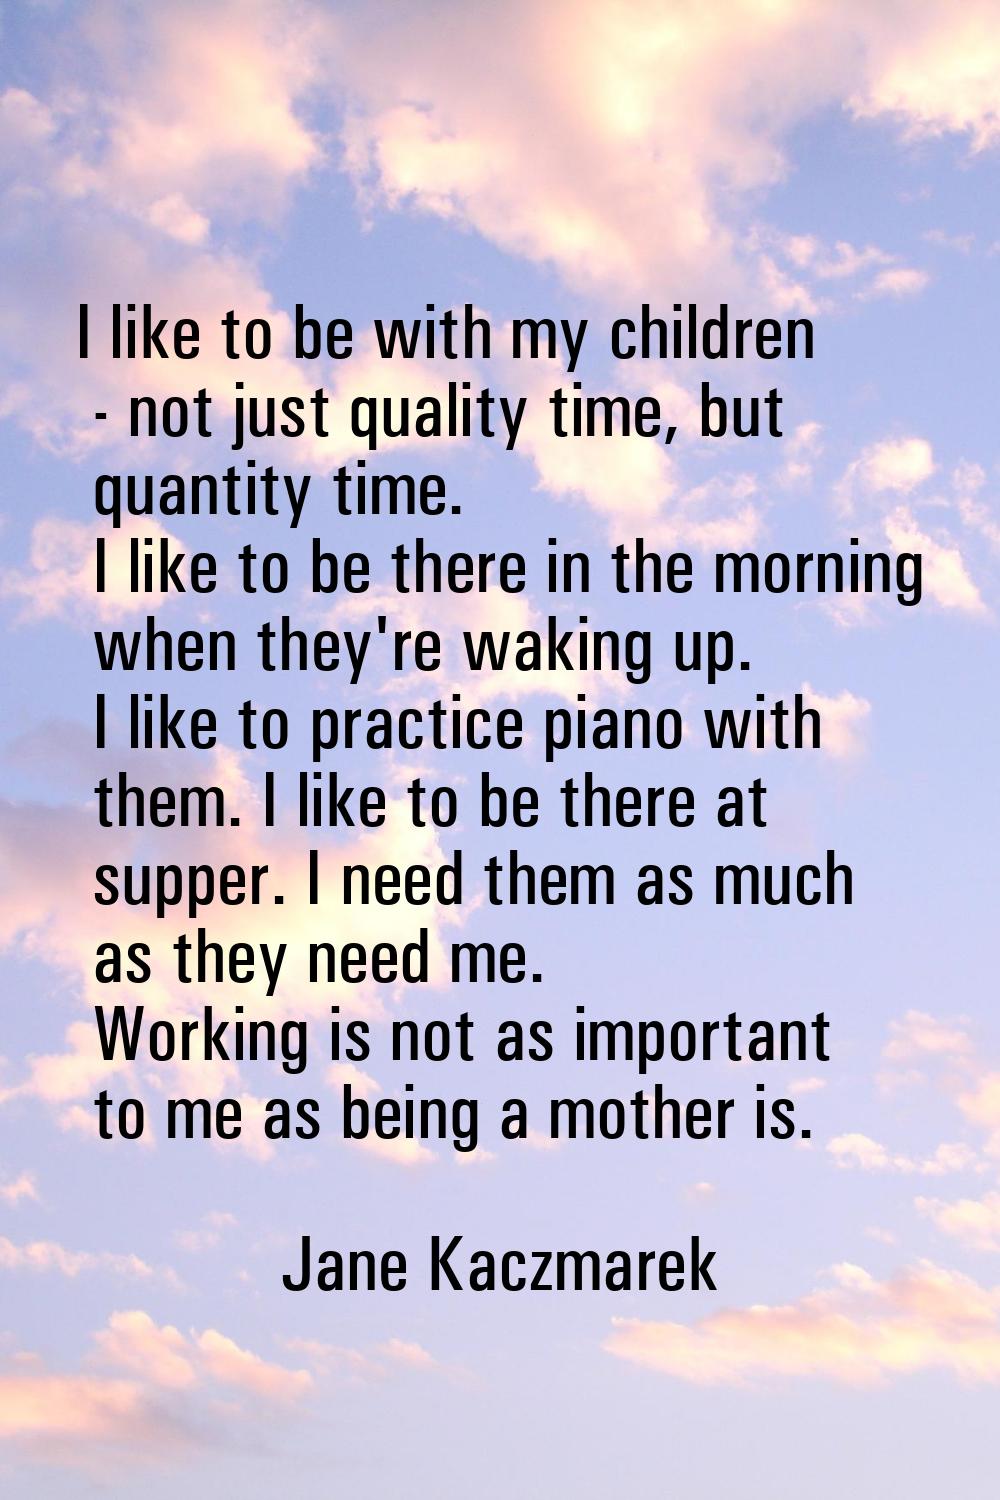 I like to be with my children - not just quality time, but quantity time. I like to be there in the